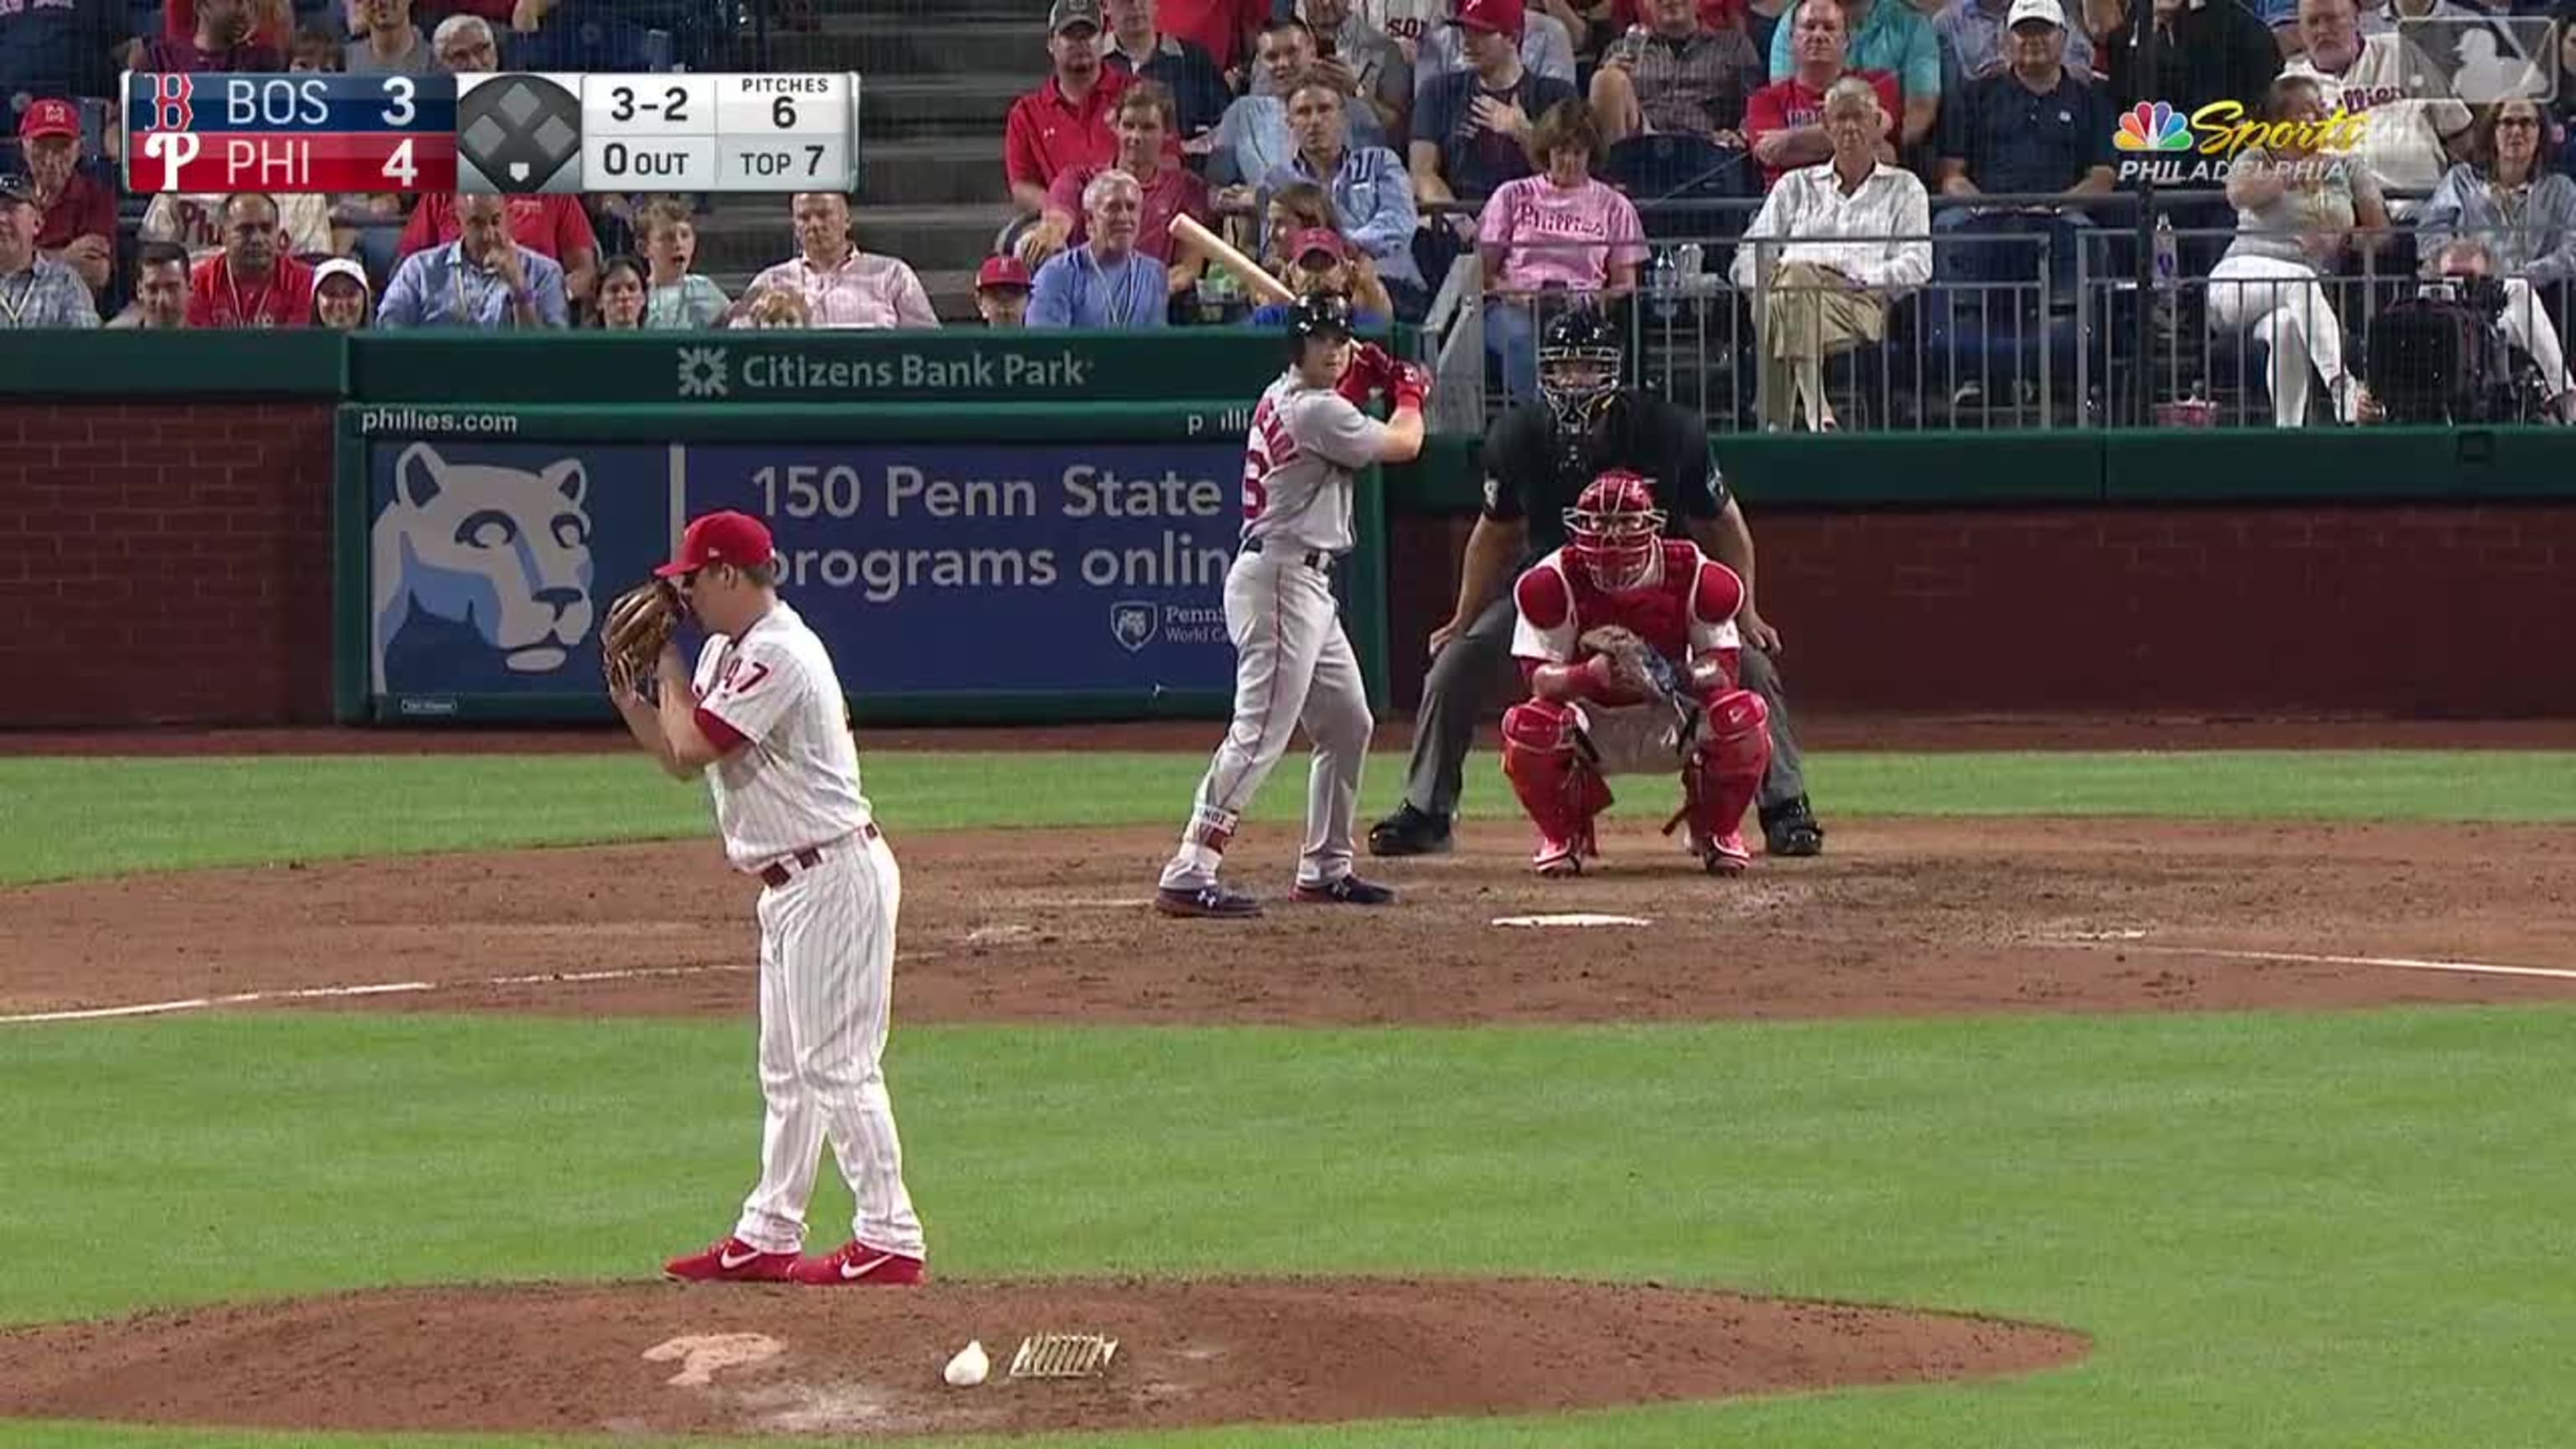 Wil Myers hits ball twice on one swing